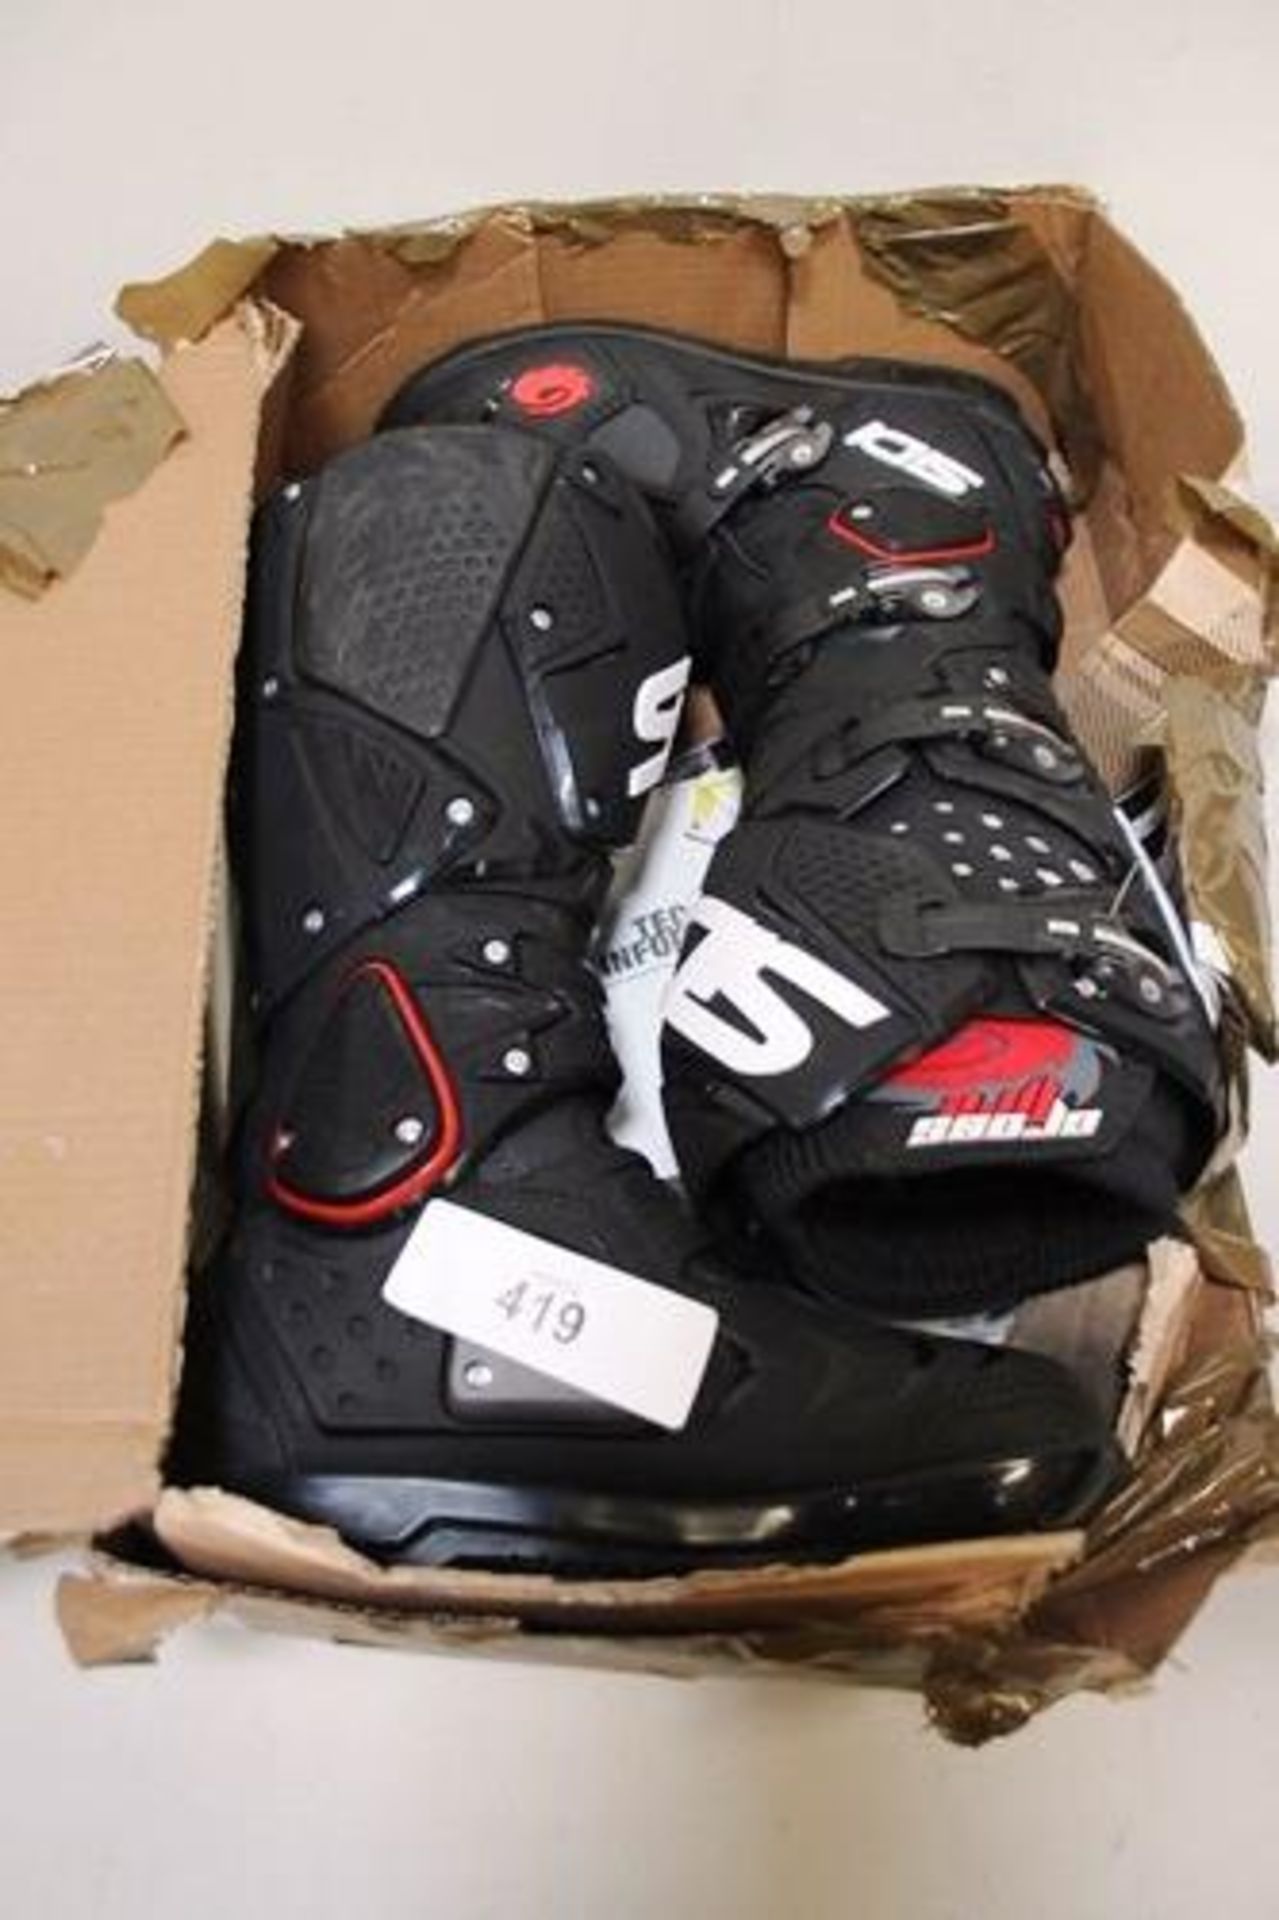 1 x pair of Sidi Crossfire black motorcycle boots, UK size 7 - New in box, box tatty (GS17)